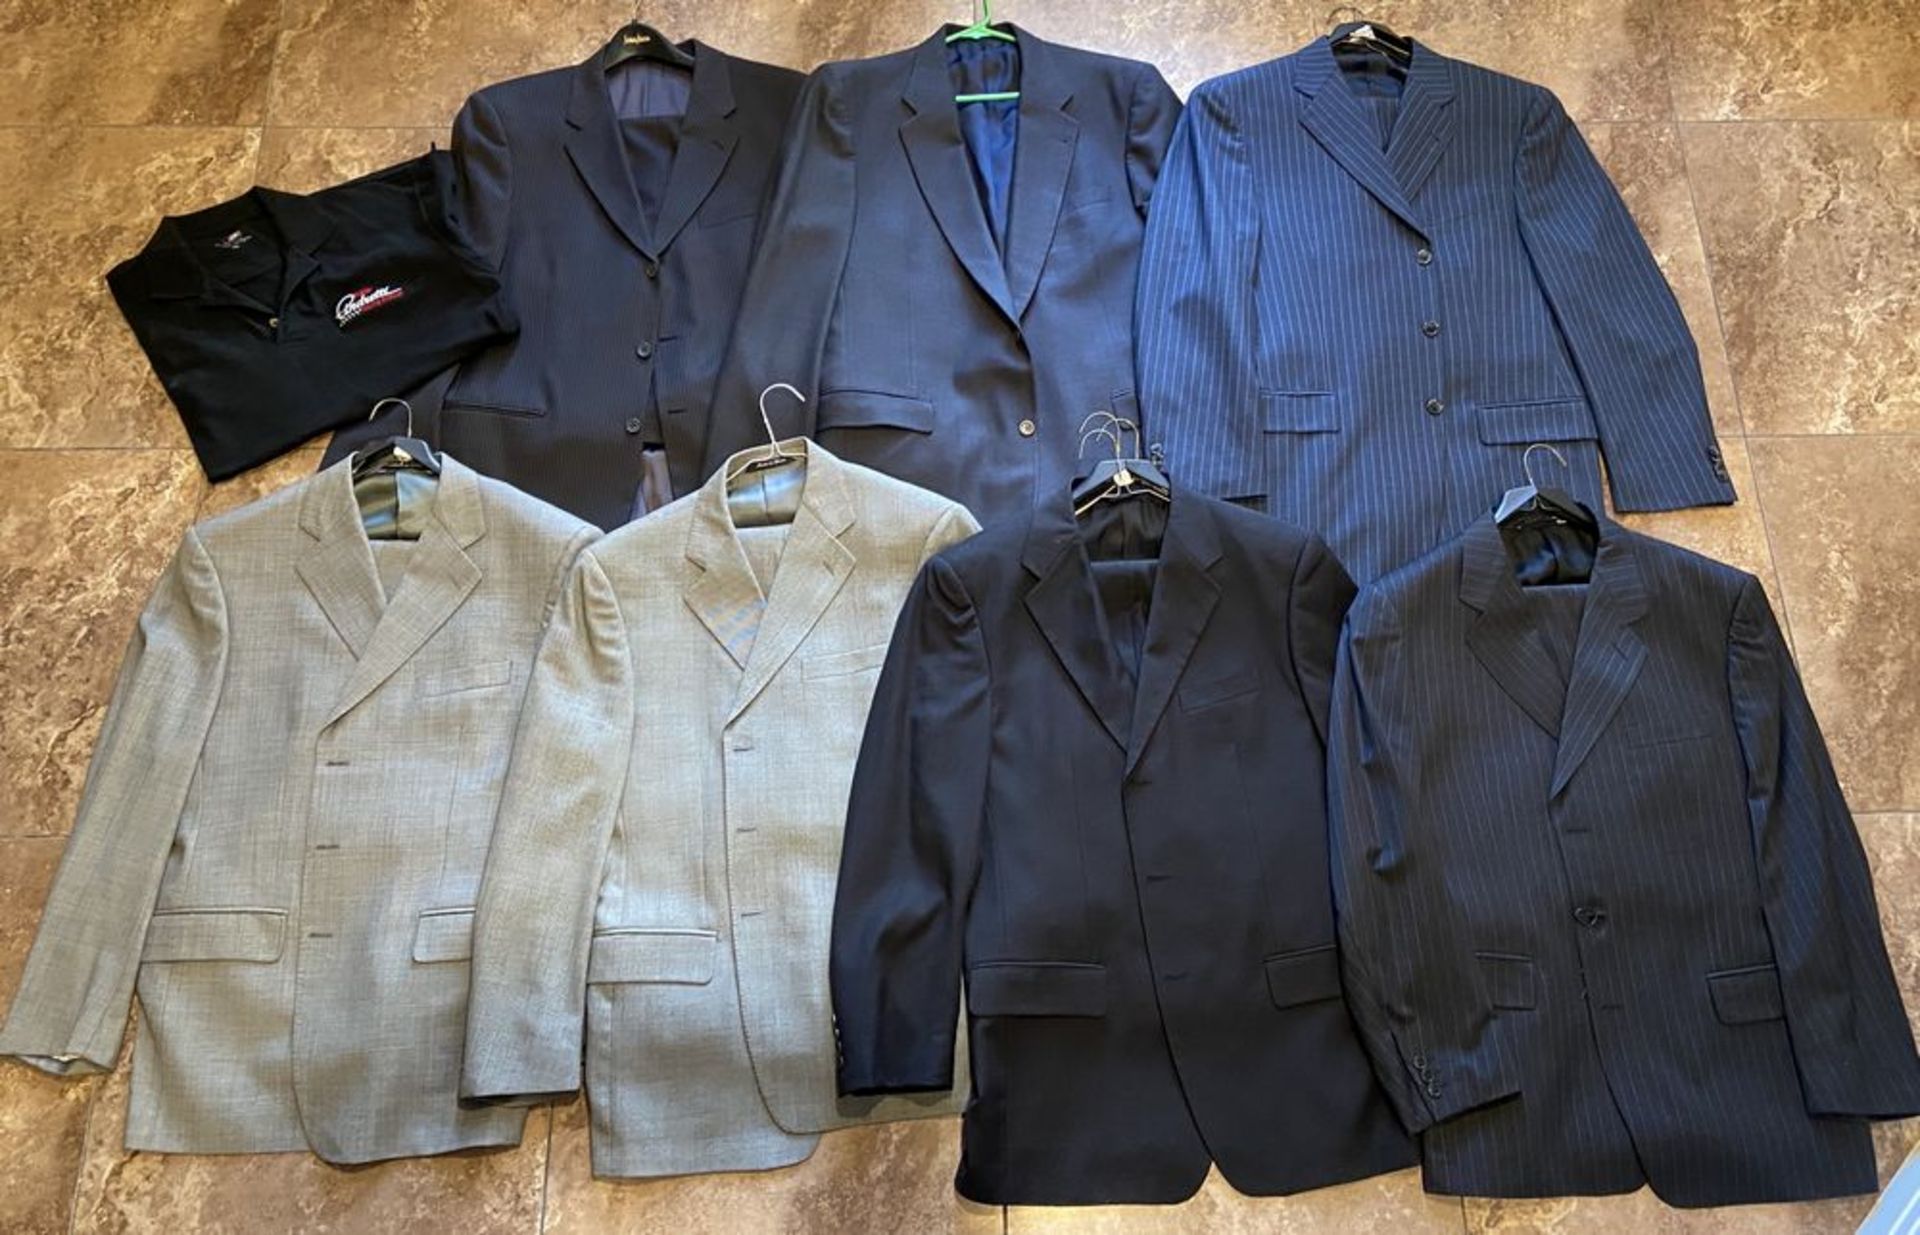 Collection of High End Men's Clothing: 6 Suits Size 42R, 1 Sport Jacket Size 42R, 1 Polo XL